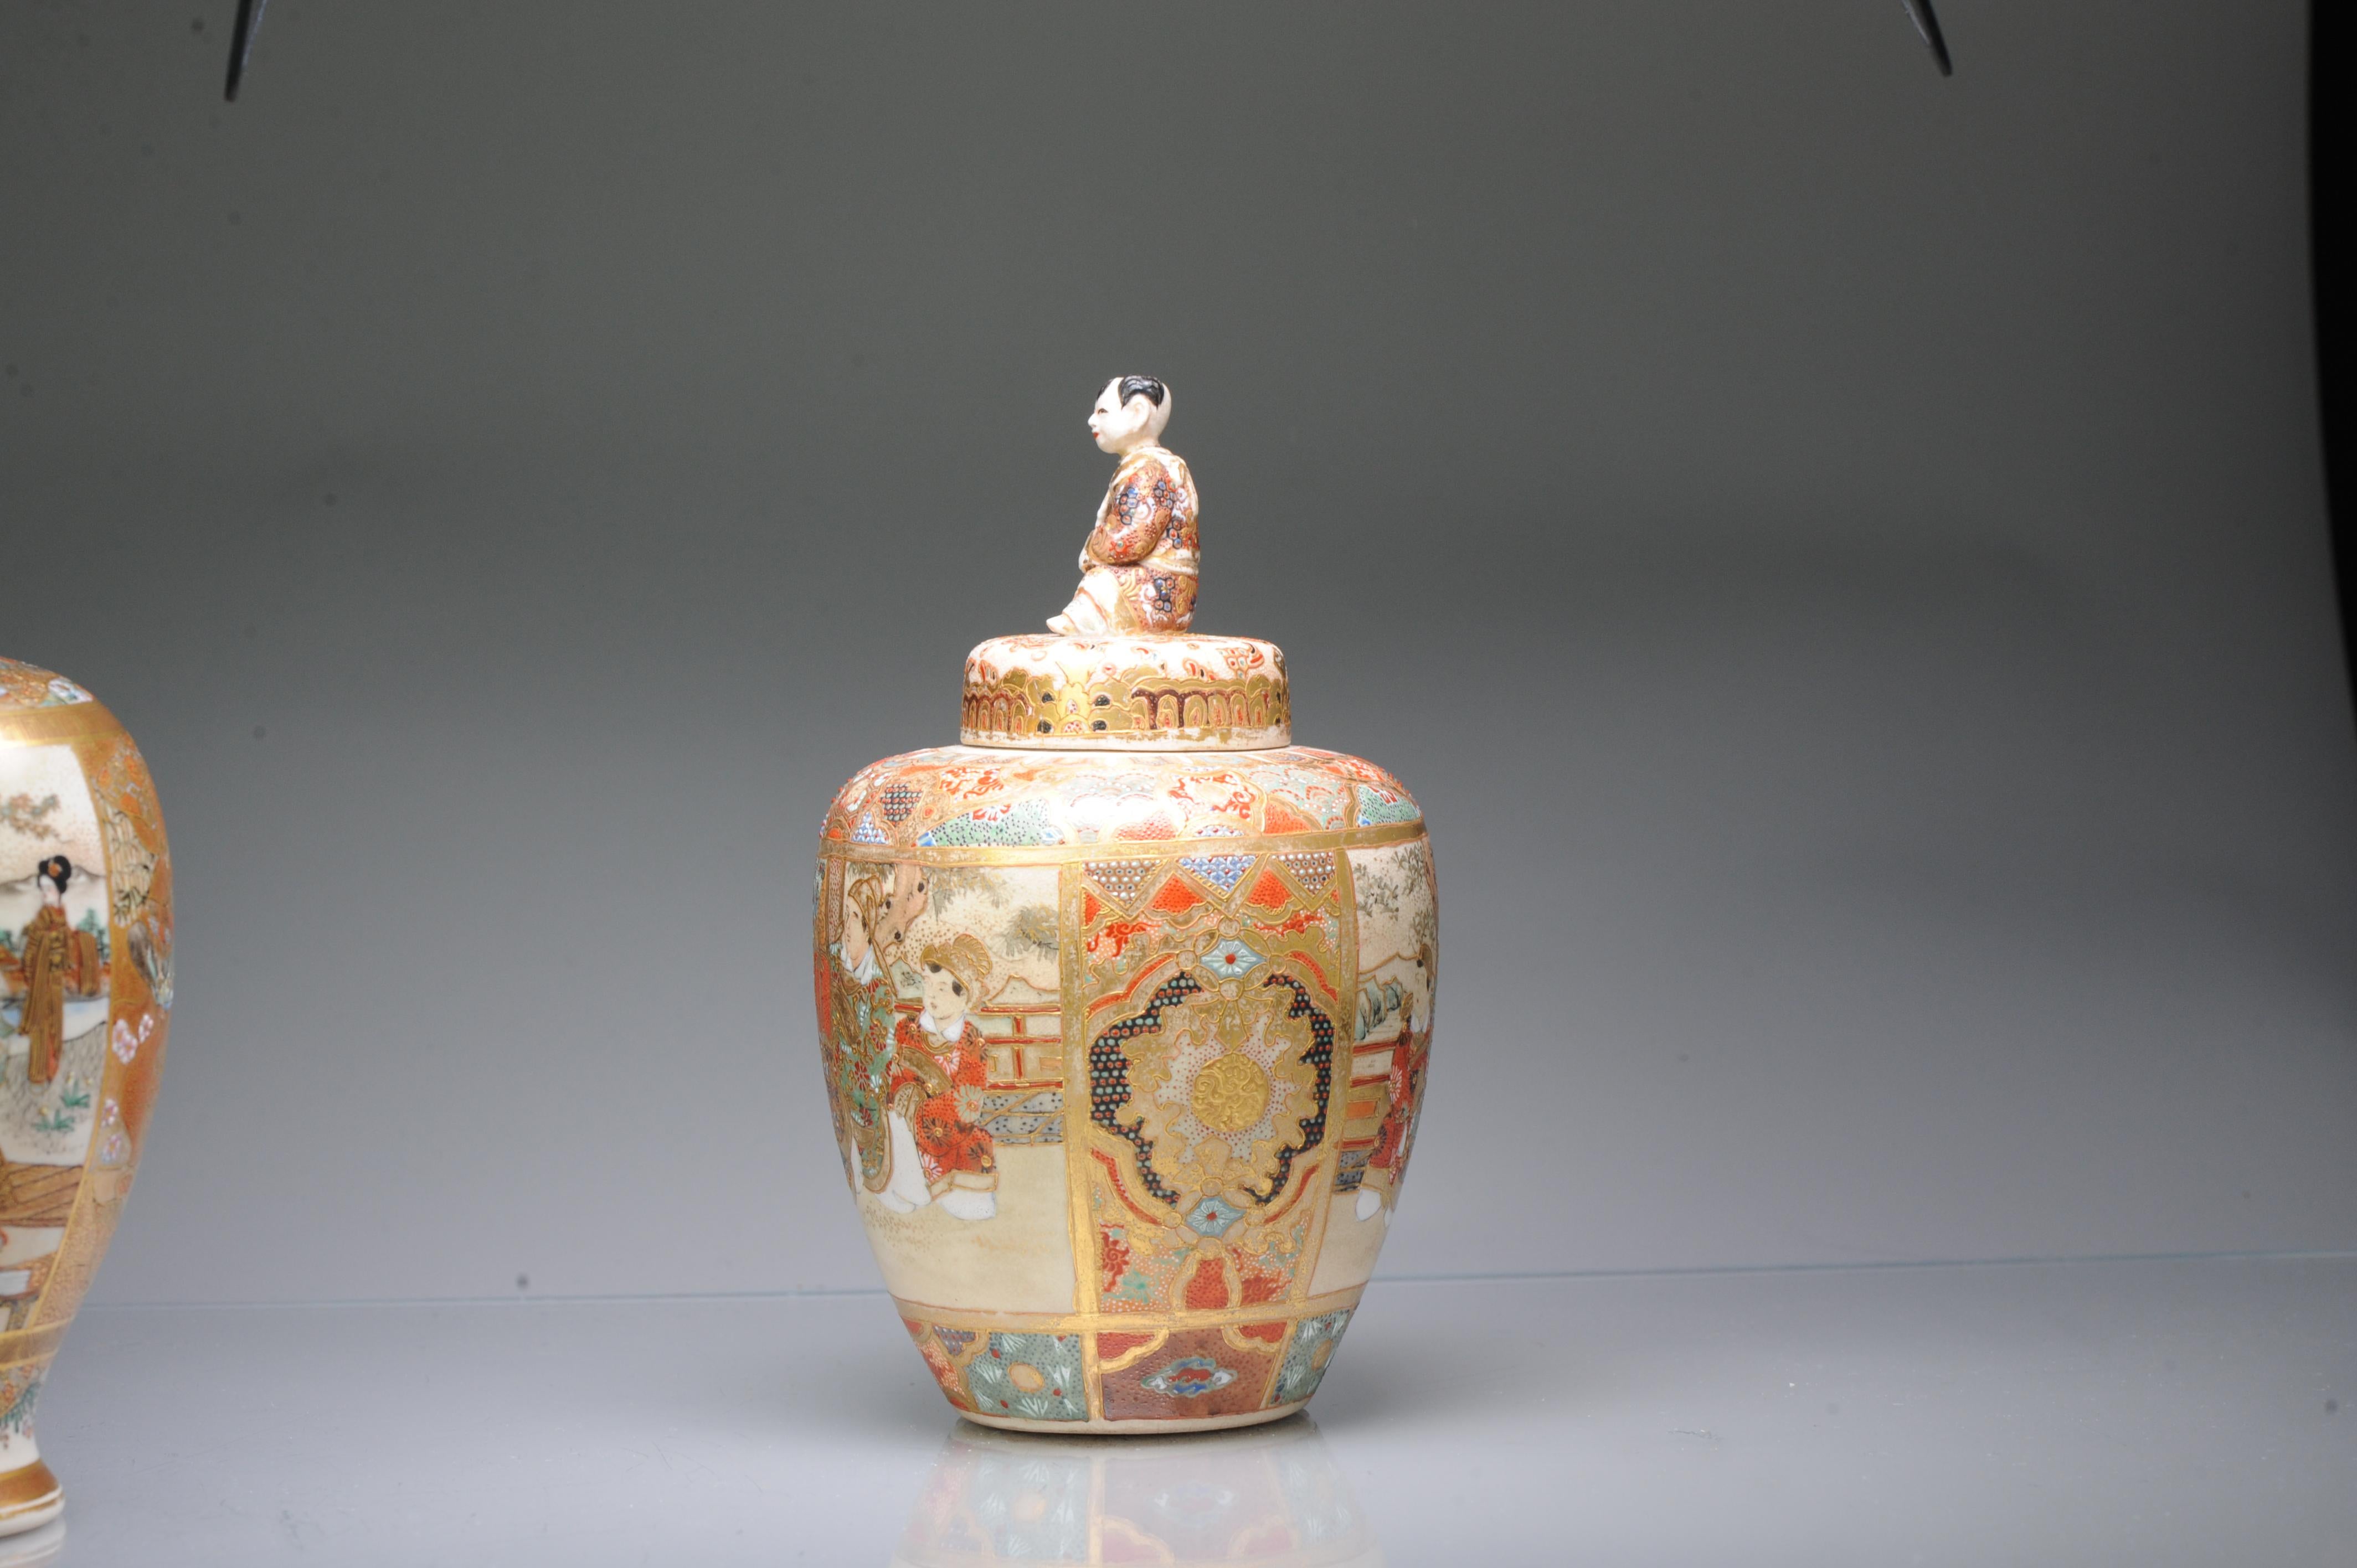 Antique Ca 1900 Japanese Satsuma Jar with Figures Richly Decorated Unmarked In Good Condition For Sale In Amsterdam, Noord Holland